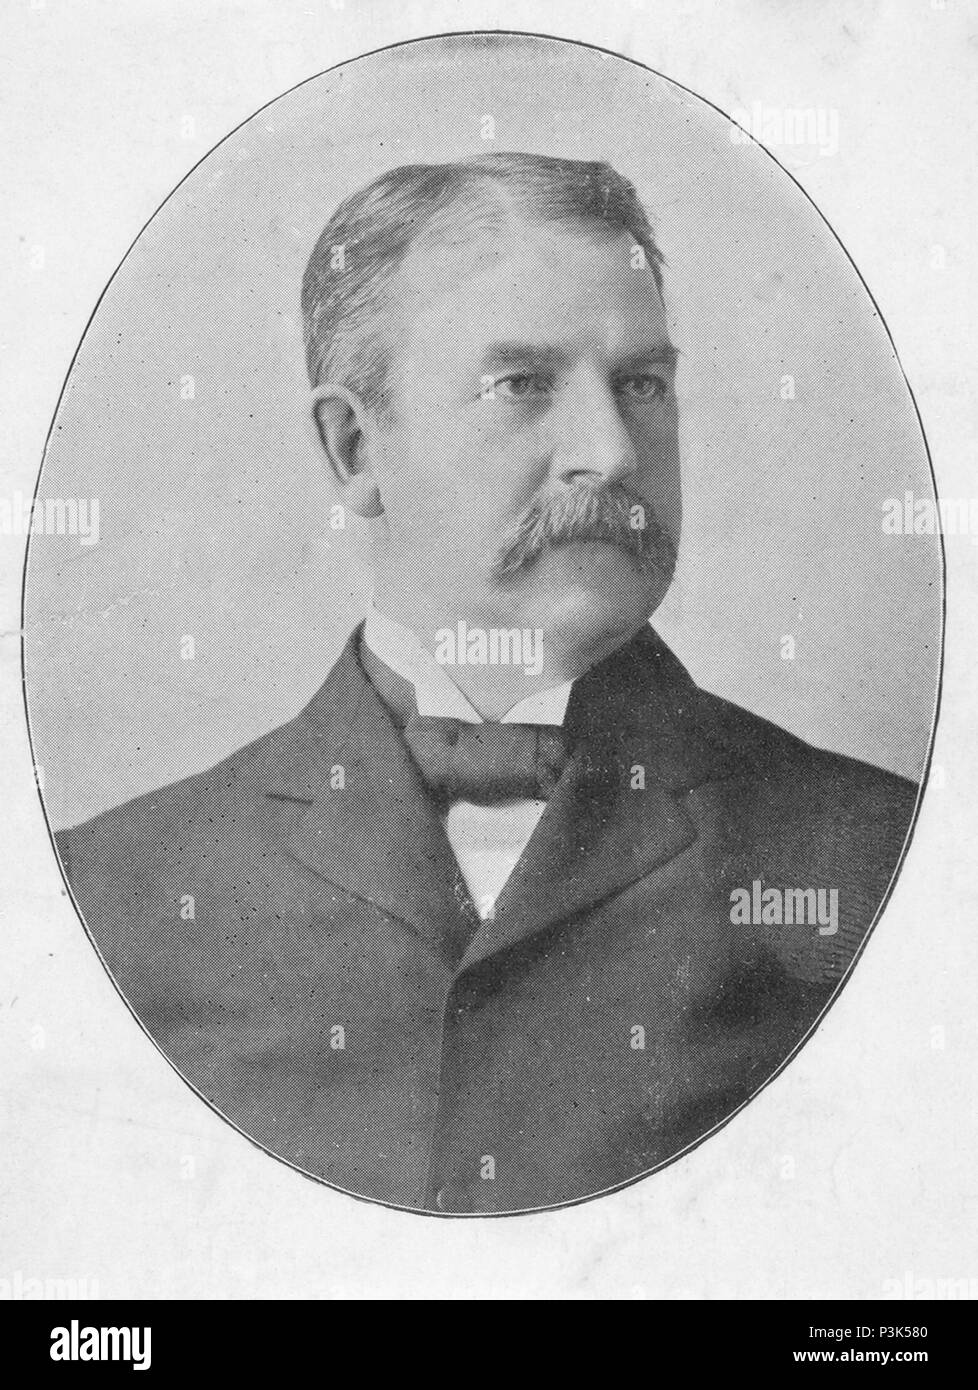 Albert Goodwill Spalding (1849 – 1915) American pitcher, manager and executive in the early years of professional baseball, and the co-founder of A.G. Spalding sporting goods company Stock Photo